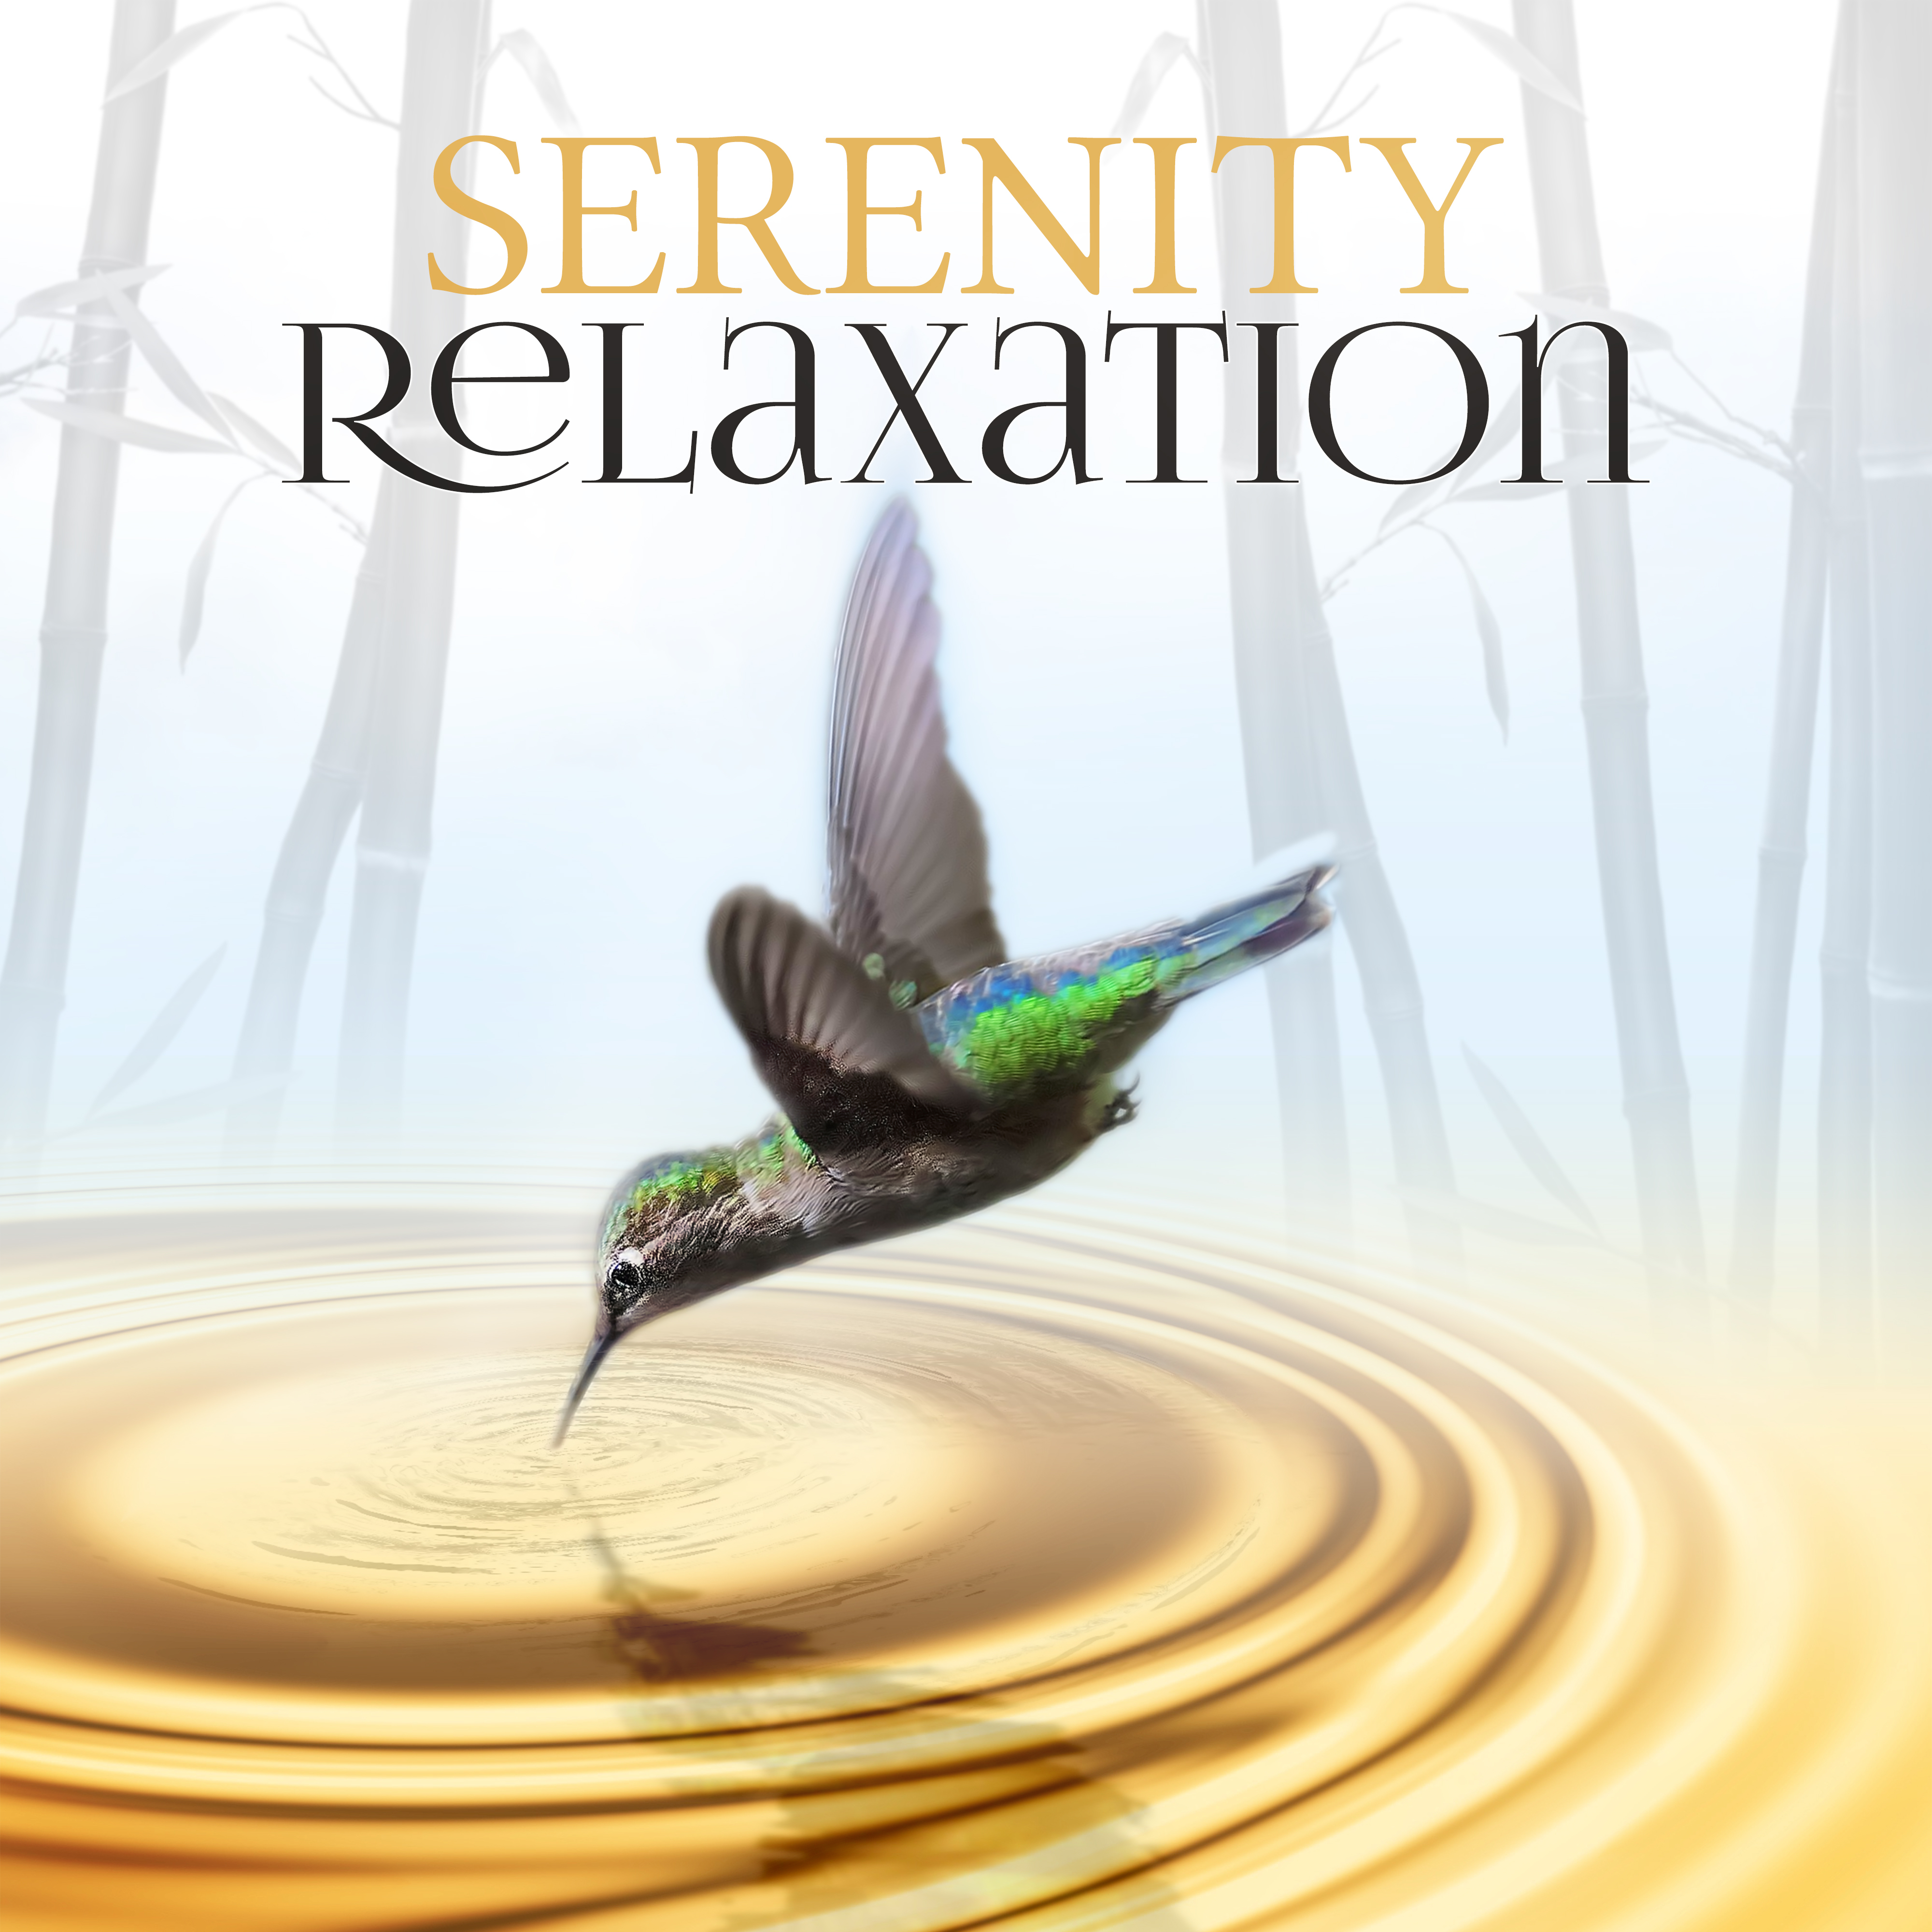 Serenity Relaxation  Deep Relaxation with Calm Background Music, Nature Sounds for Yoga, Massage, Reiki, Spa, Mindfulness Meditation